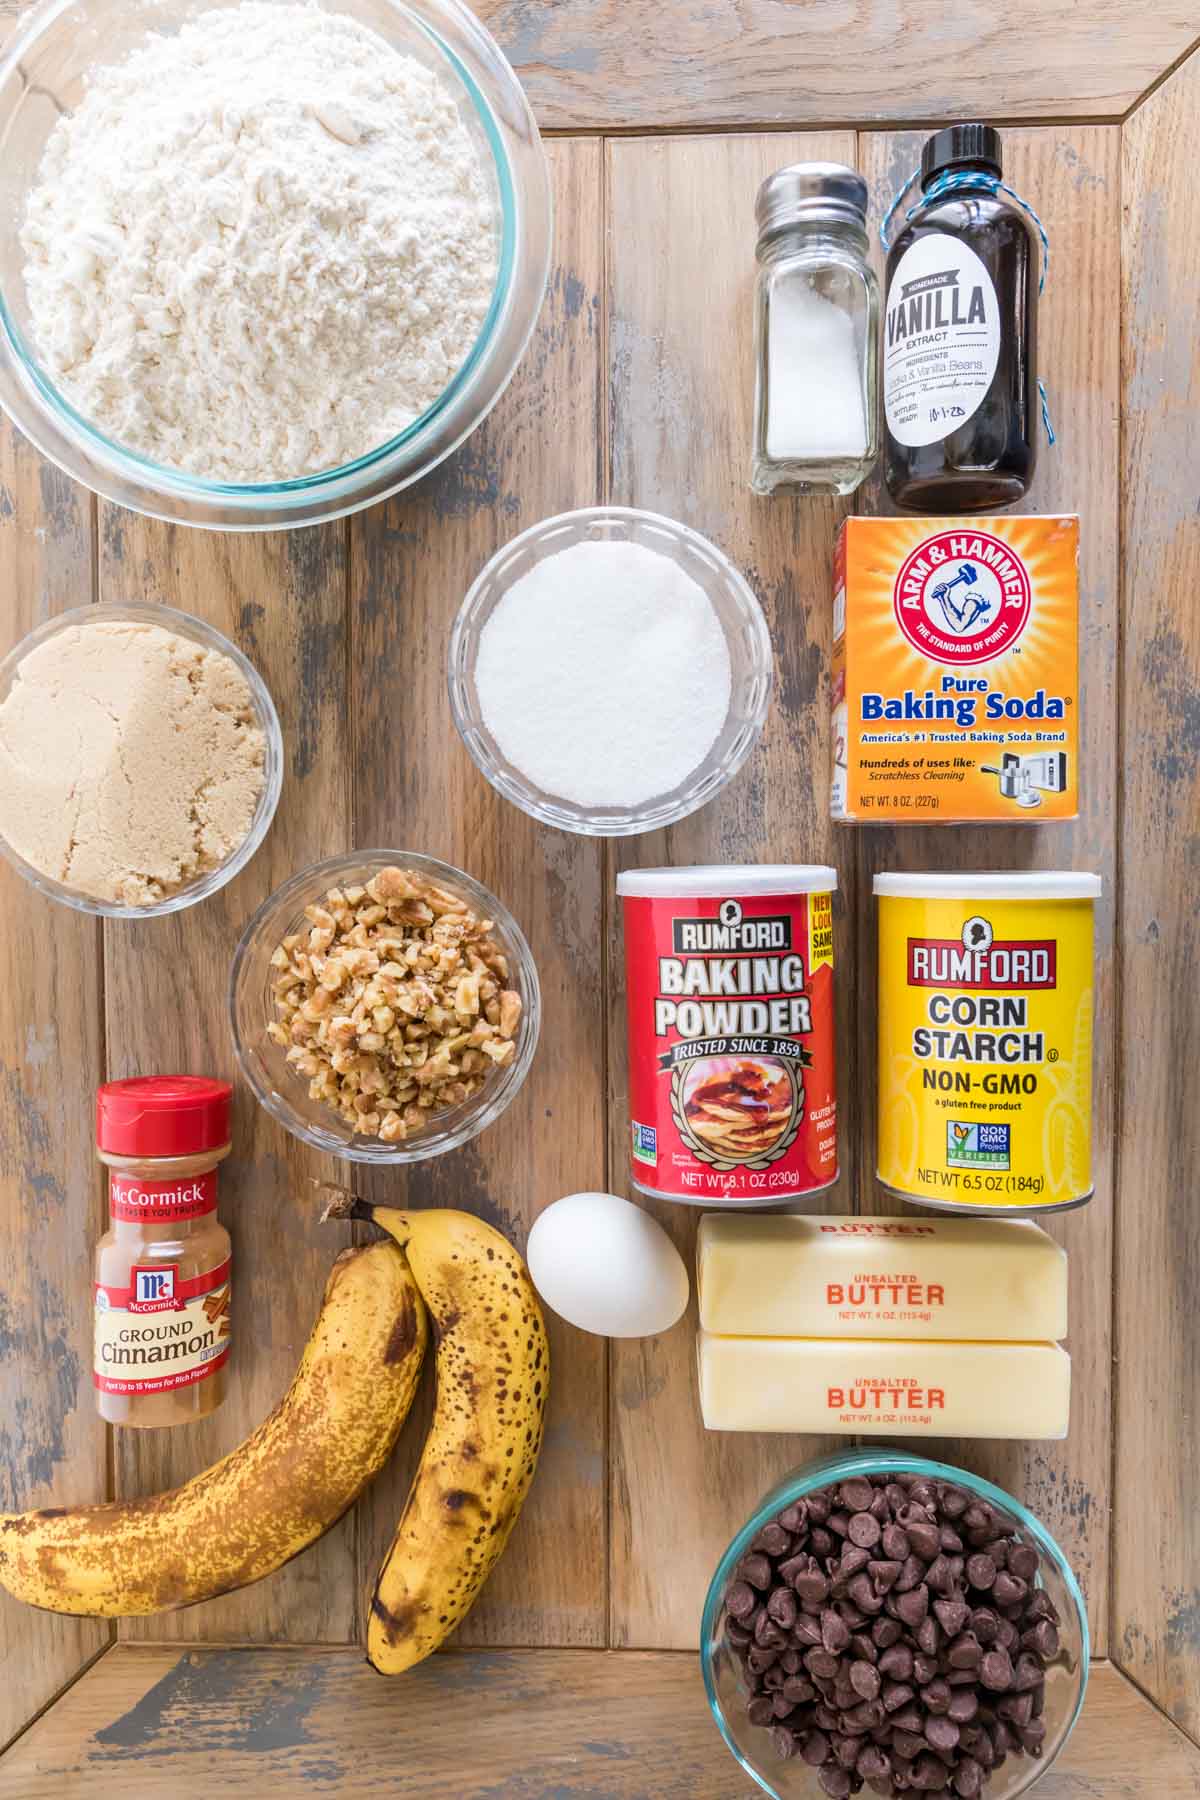 overhead view of ingredients including flour, brown sugar, walnuts, bananas, chocolate chips, and more